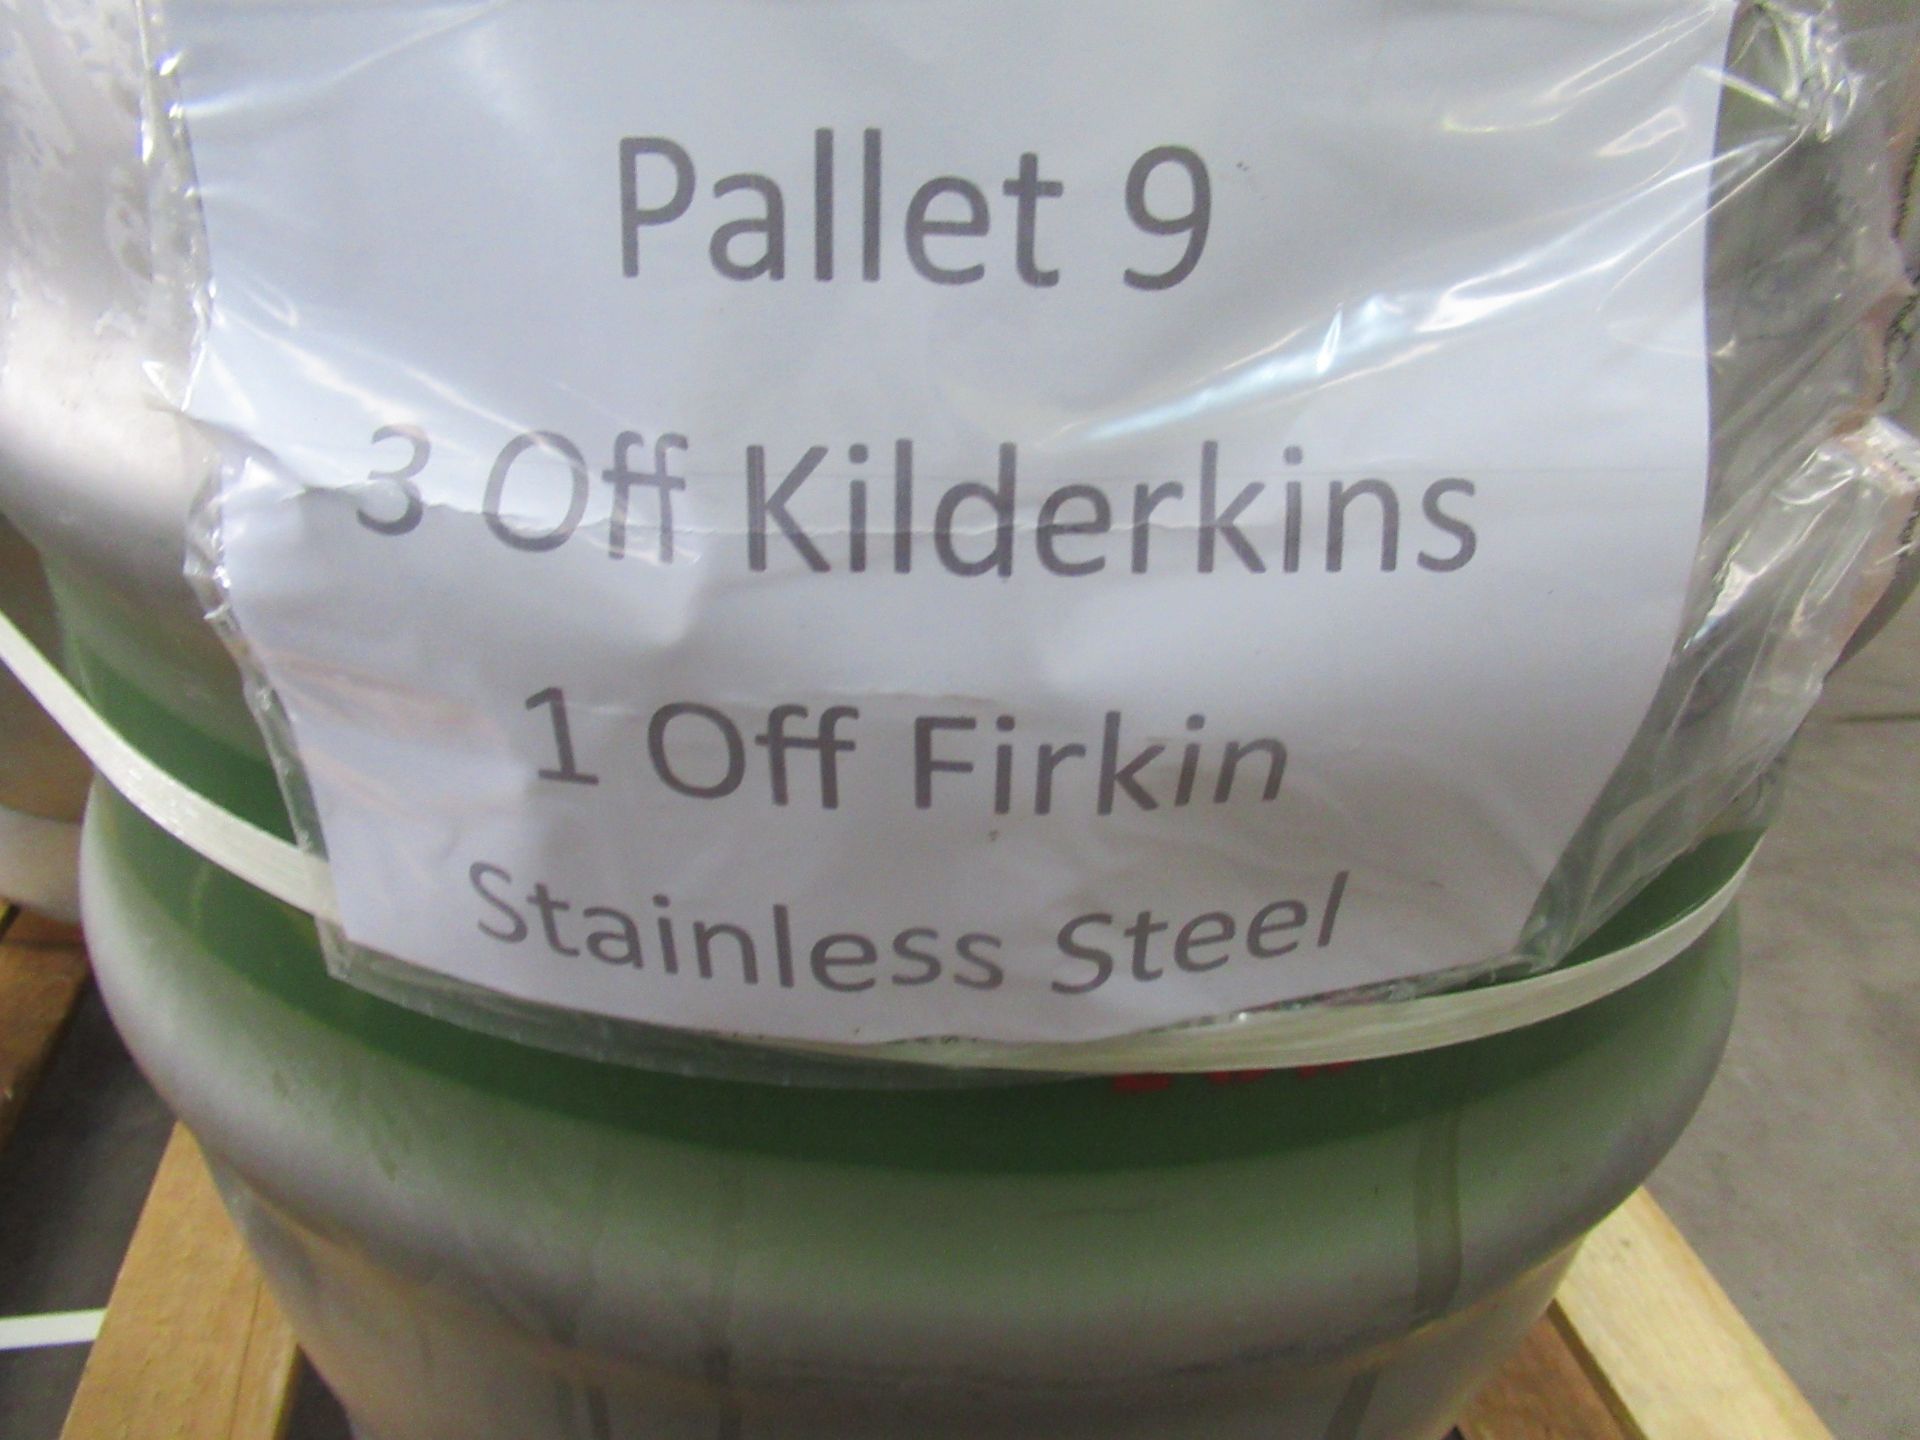 3x Stainless Steel Kilderkins and 1x Stainless Steel Firkin - Image 3 of 4